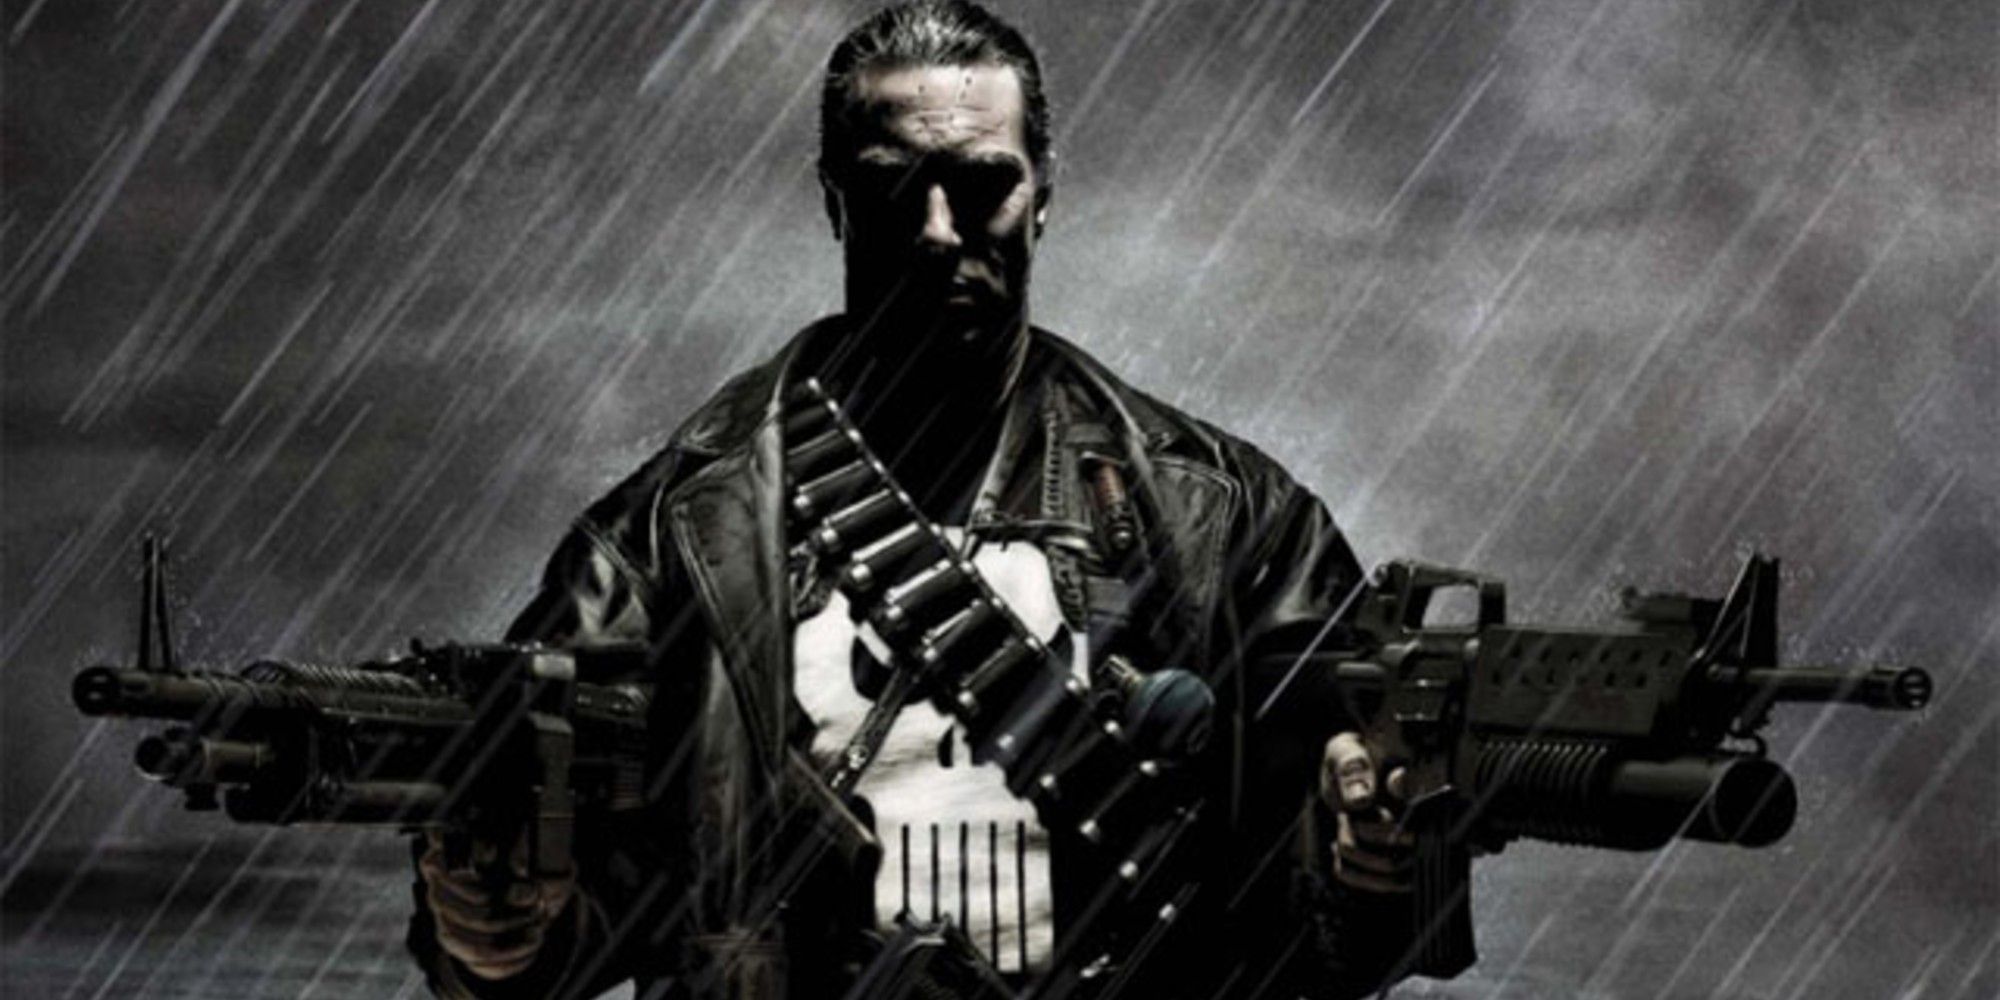 The Punisher holding weapons while it rains in Marvel Comics